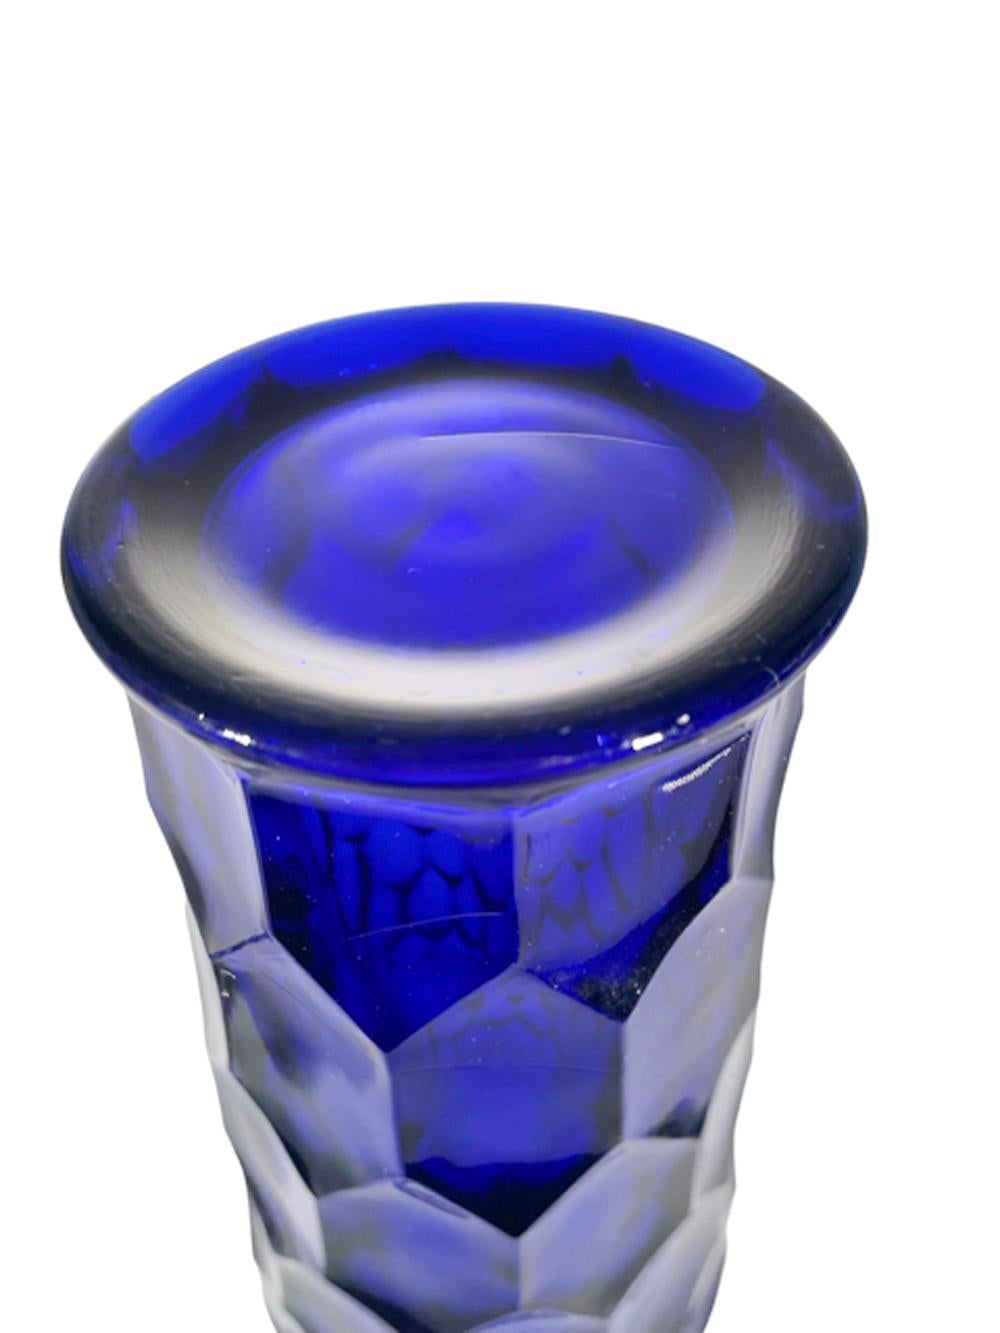 American Art Deco Cobalt Blue Shaker by Paden City Glass in the 